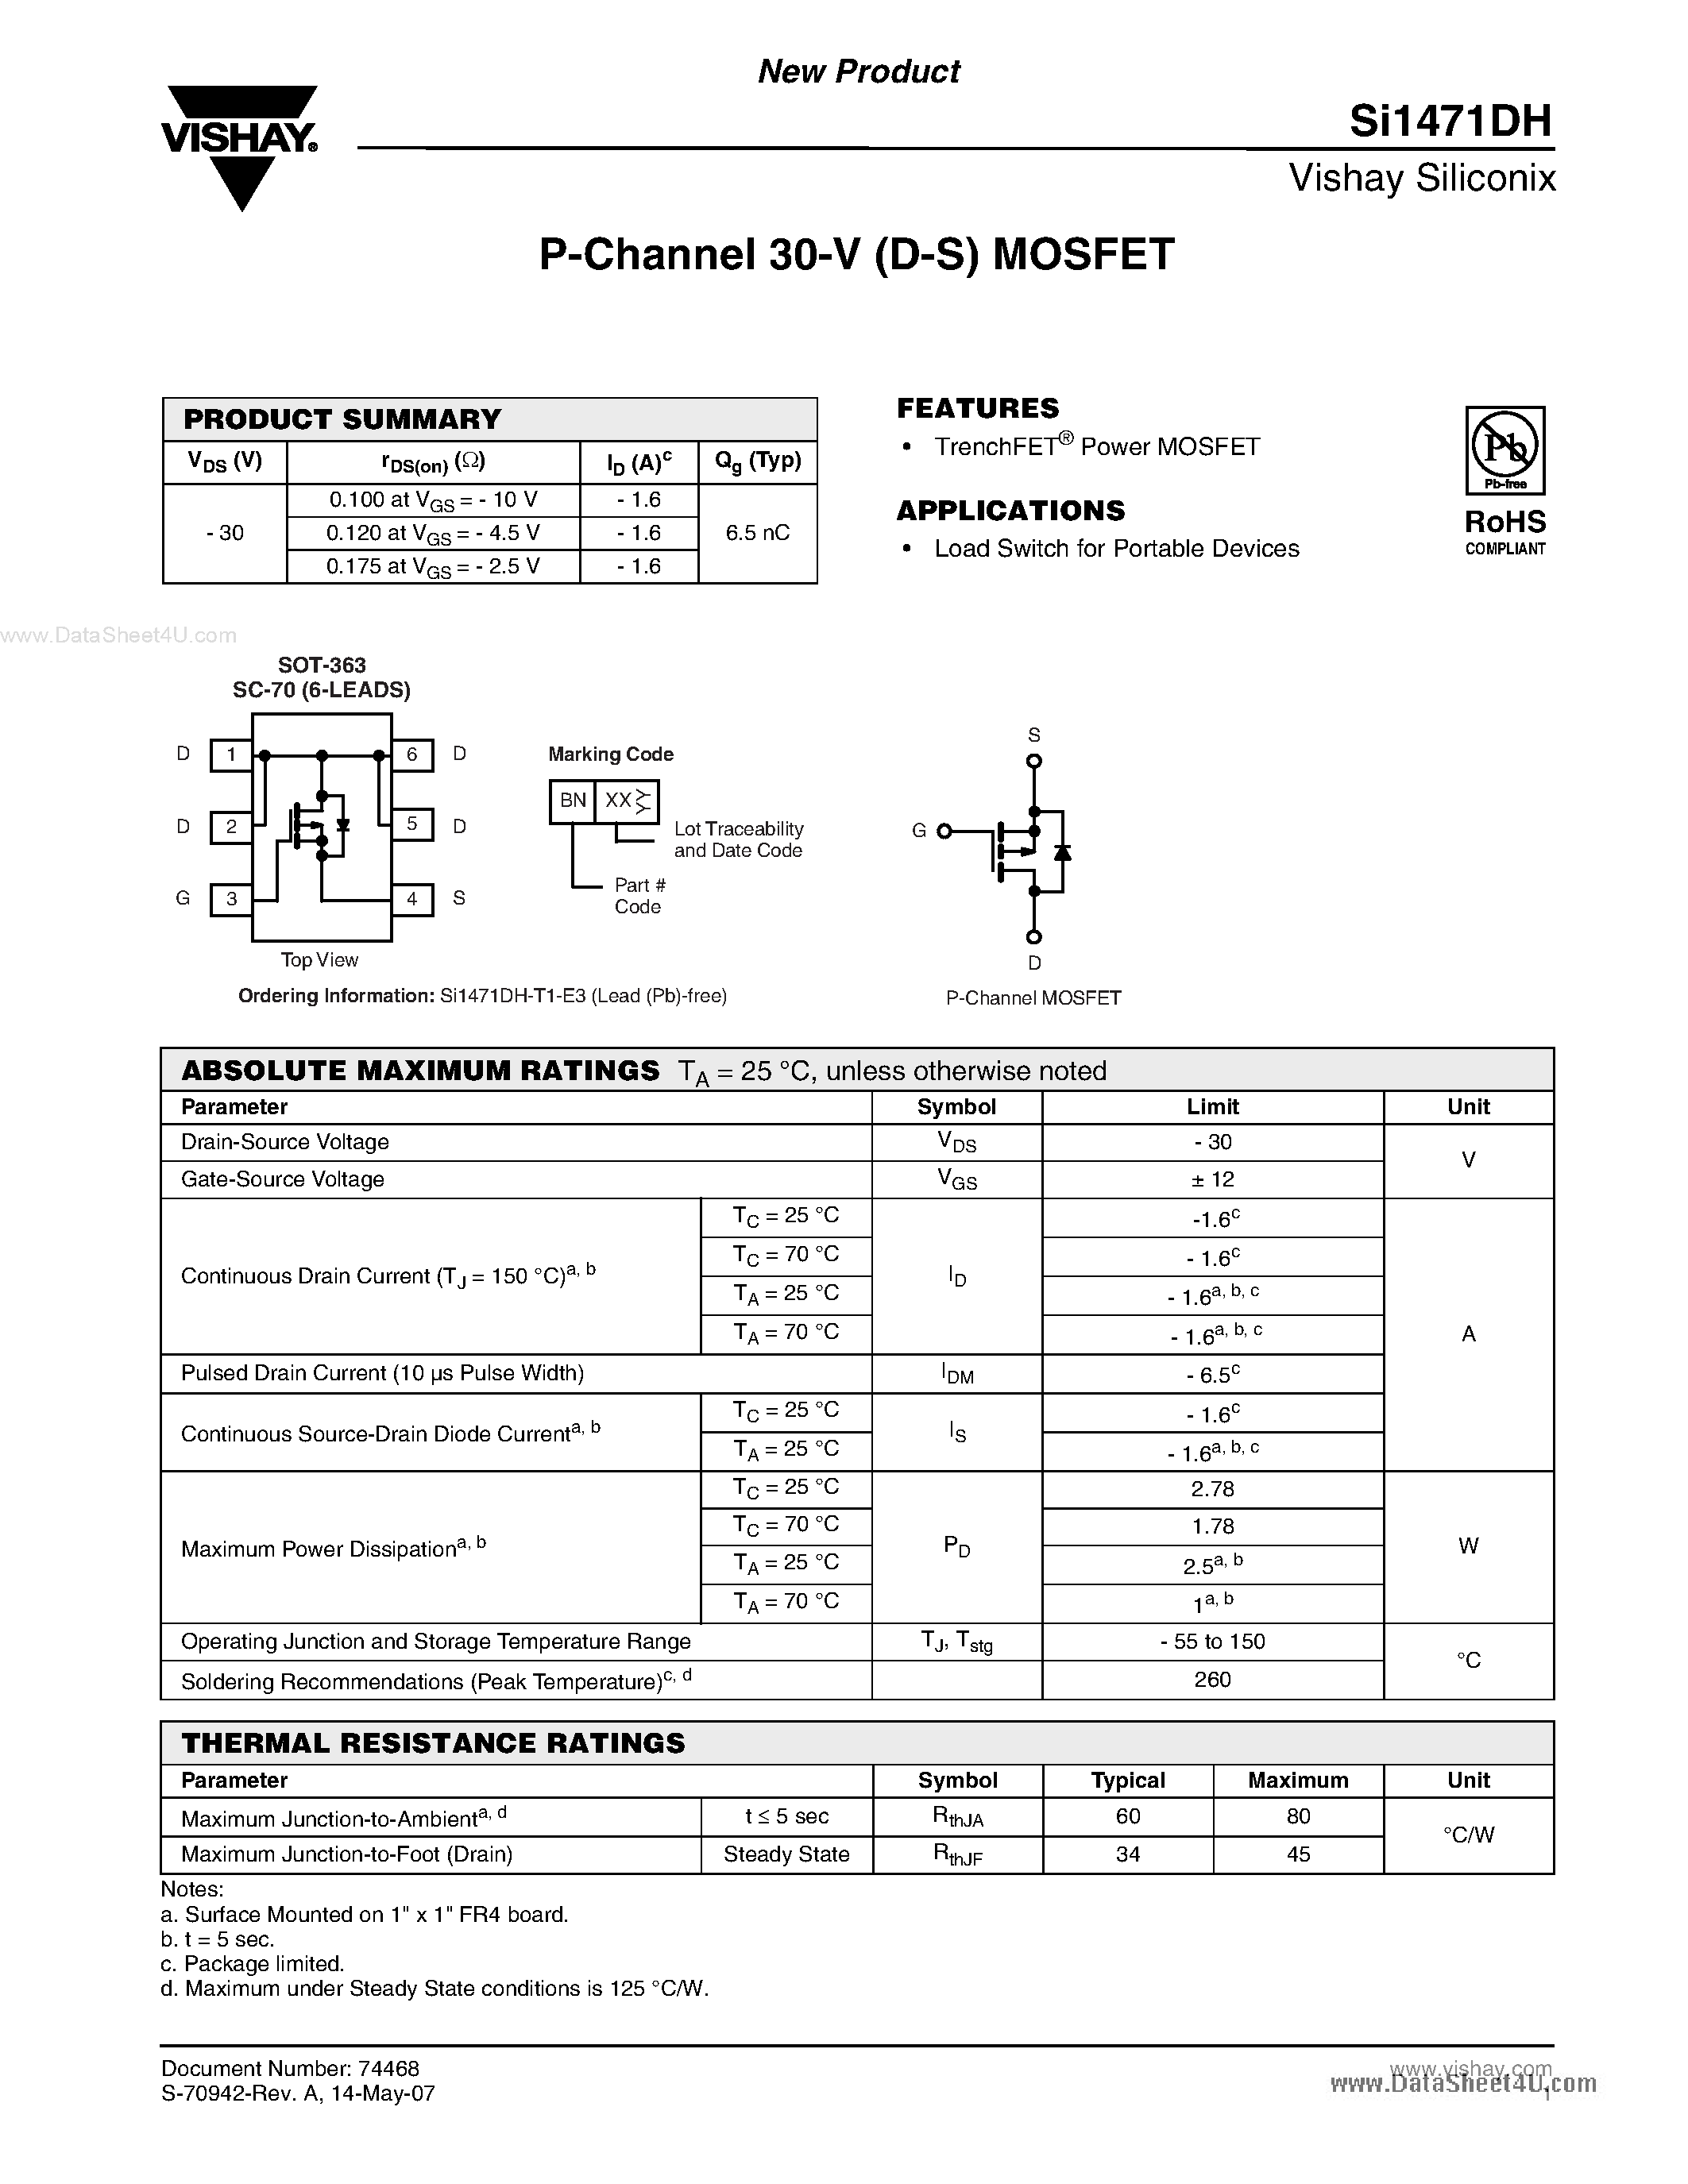 Даташит SI1471DH - P-Channel MOSFET страница 1